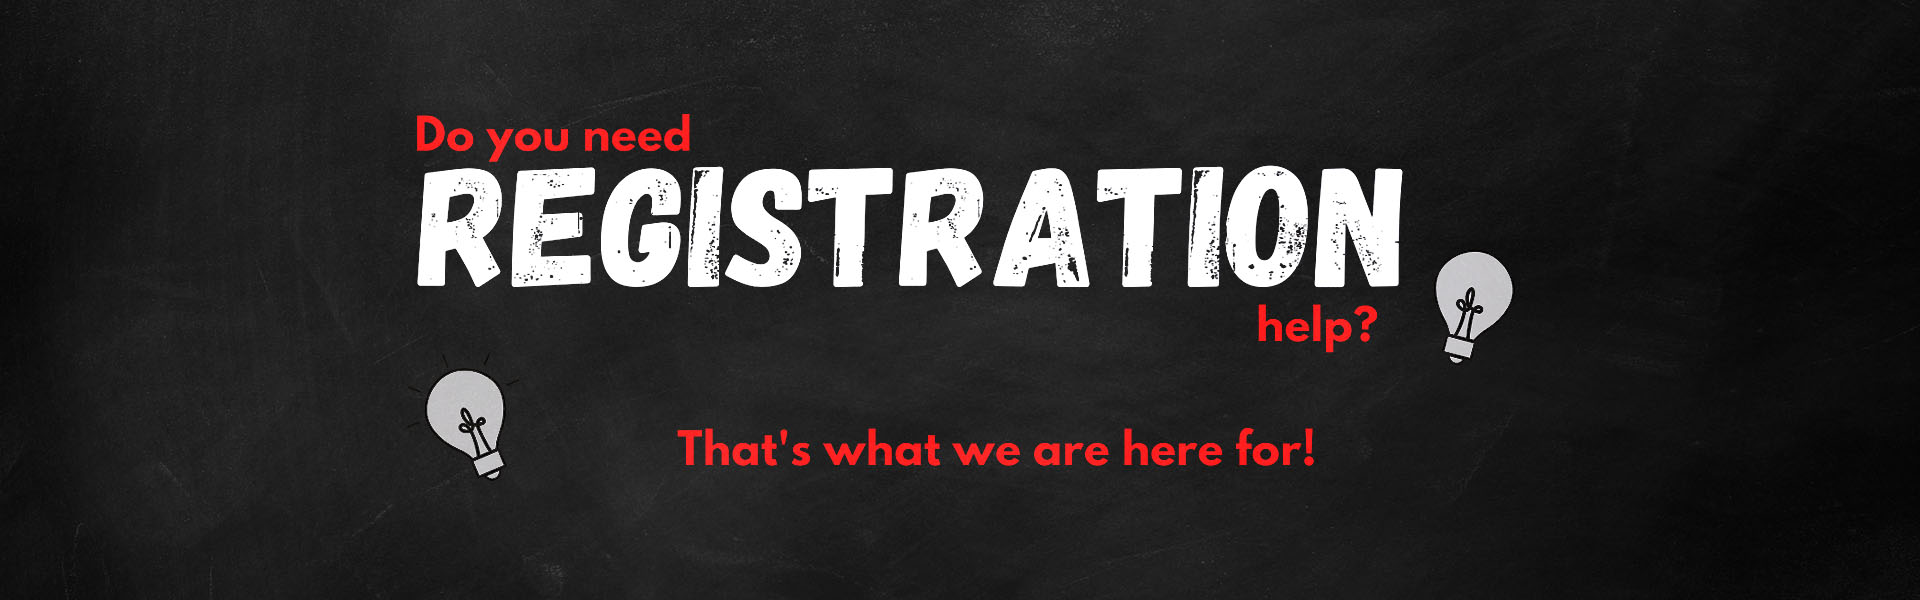 Do you need Registration help? That's what we are here for!